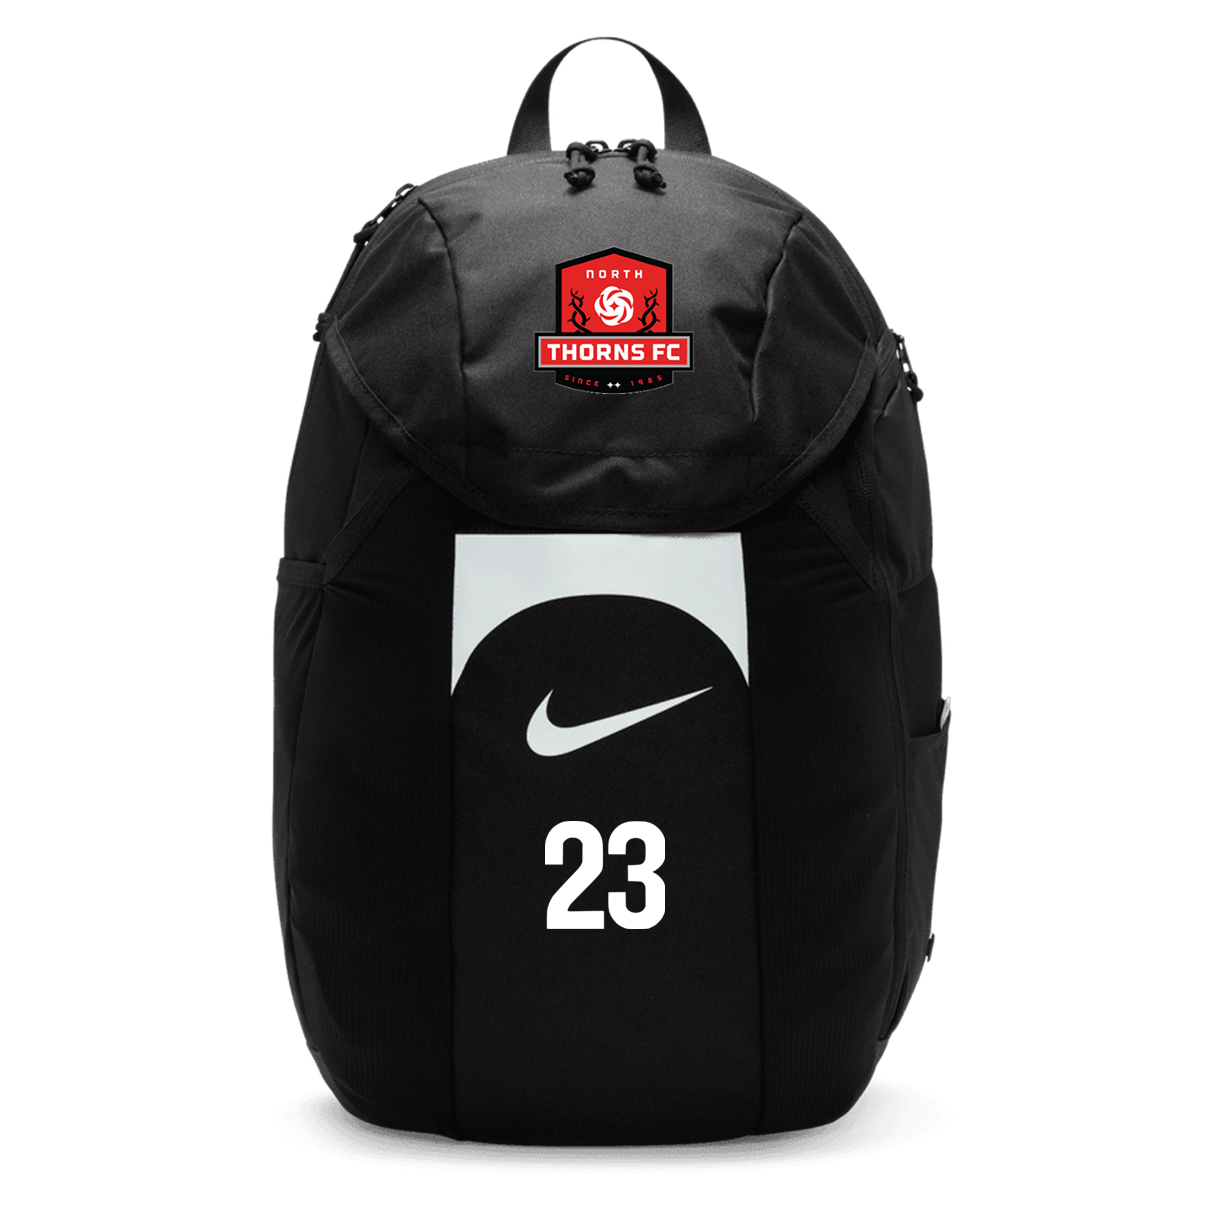 North FC Thorns Backpack